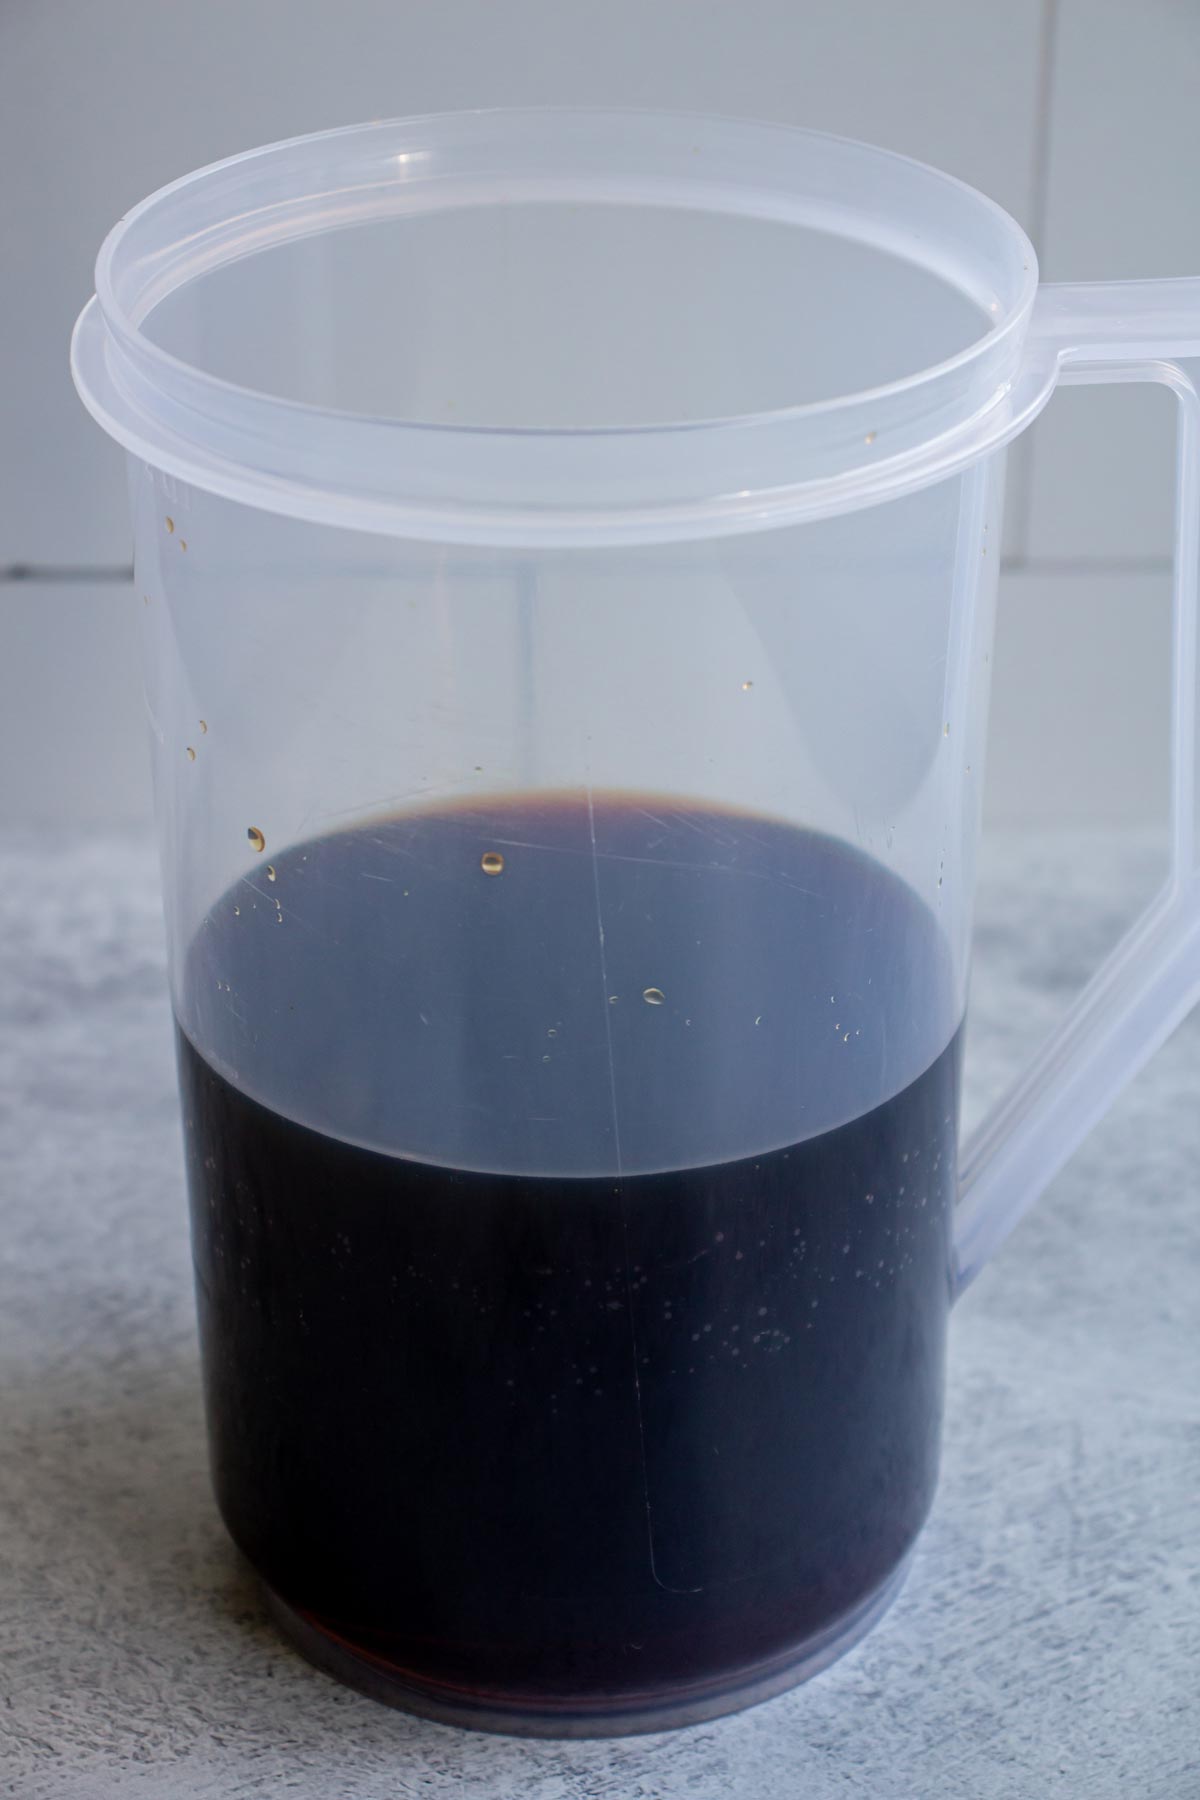 Strained cold brew coffee in a clear plastic pitcher.